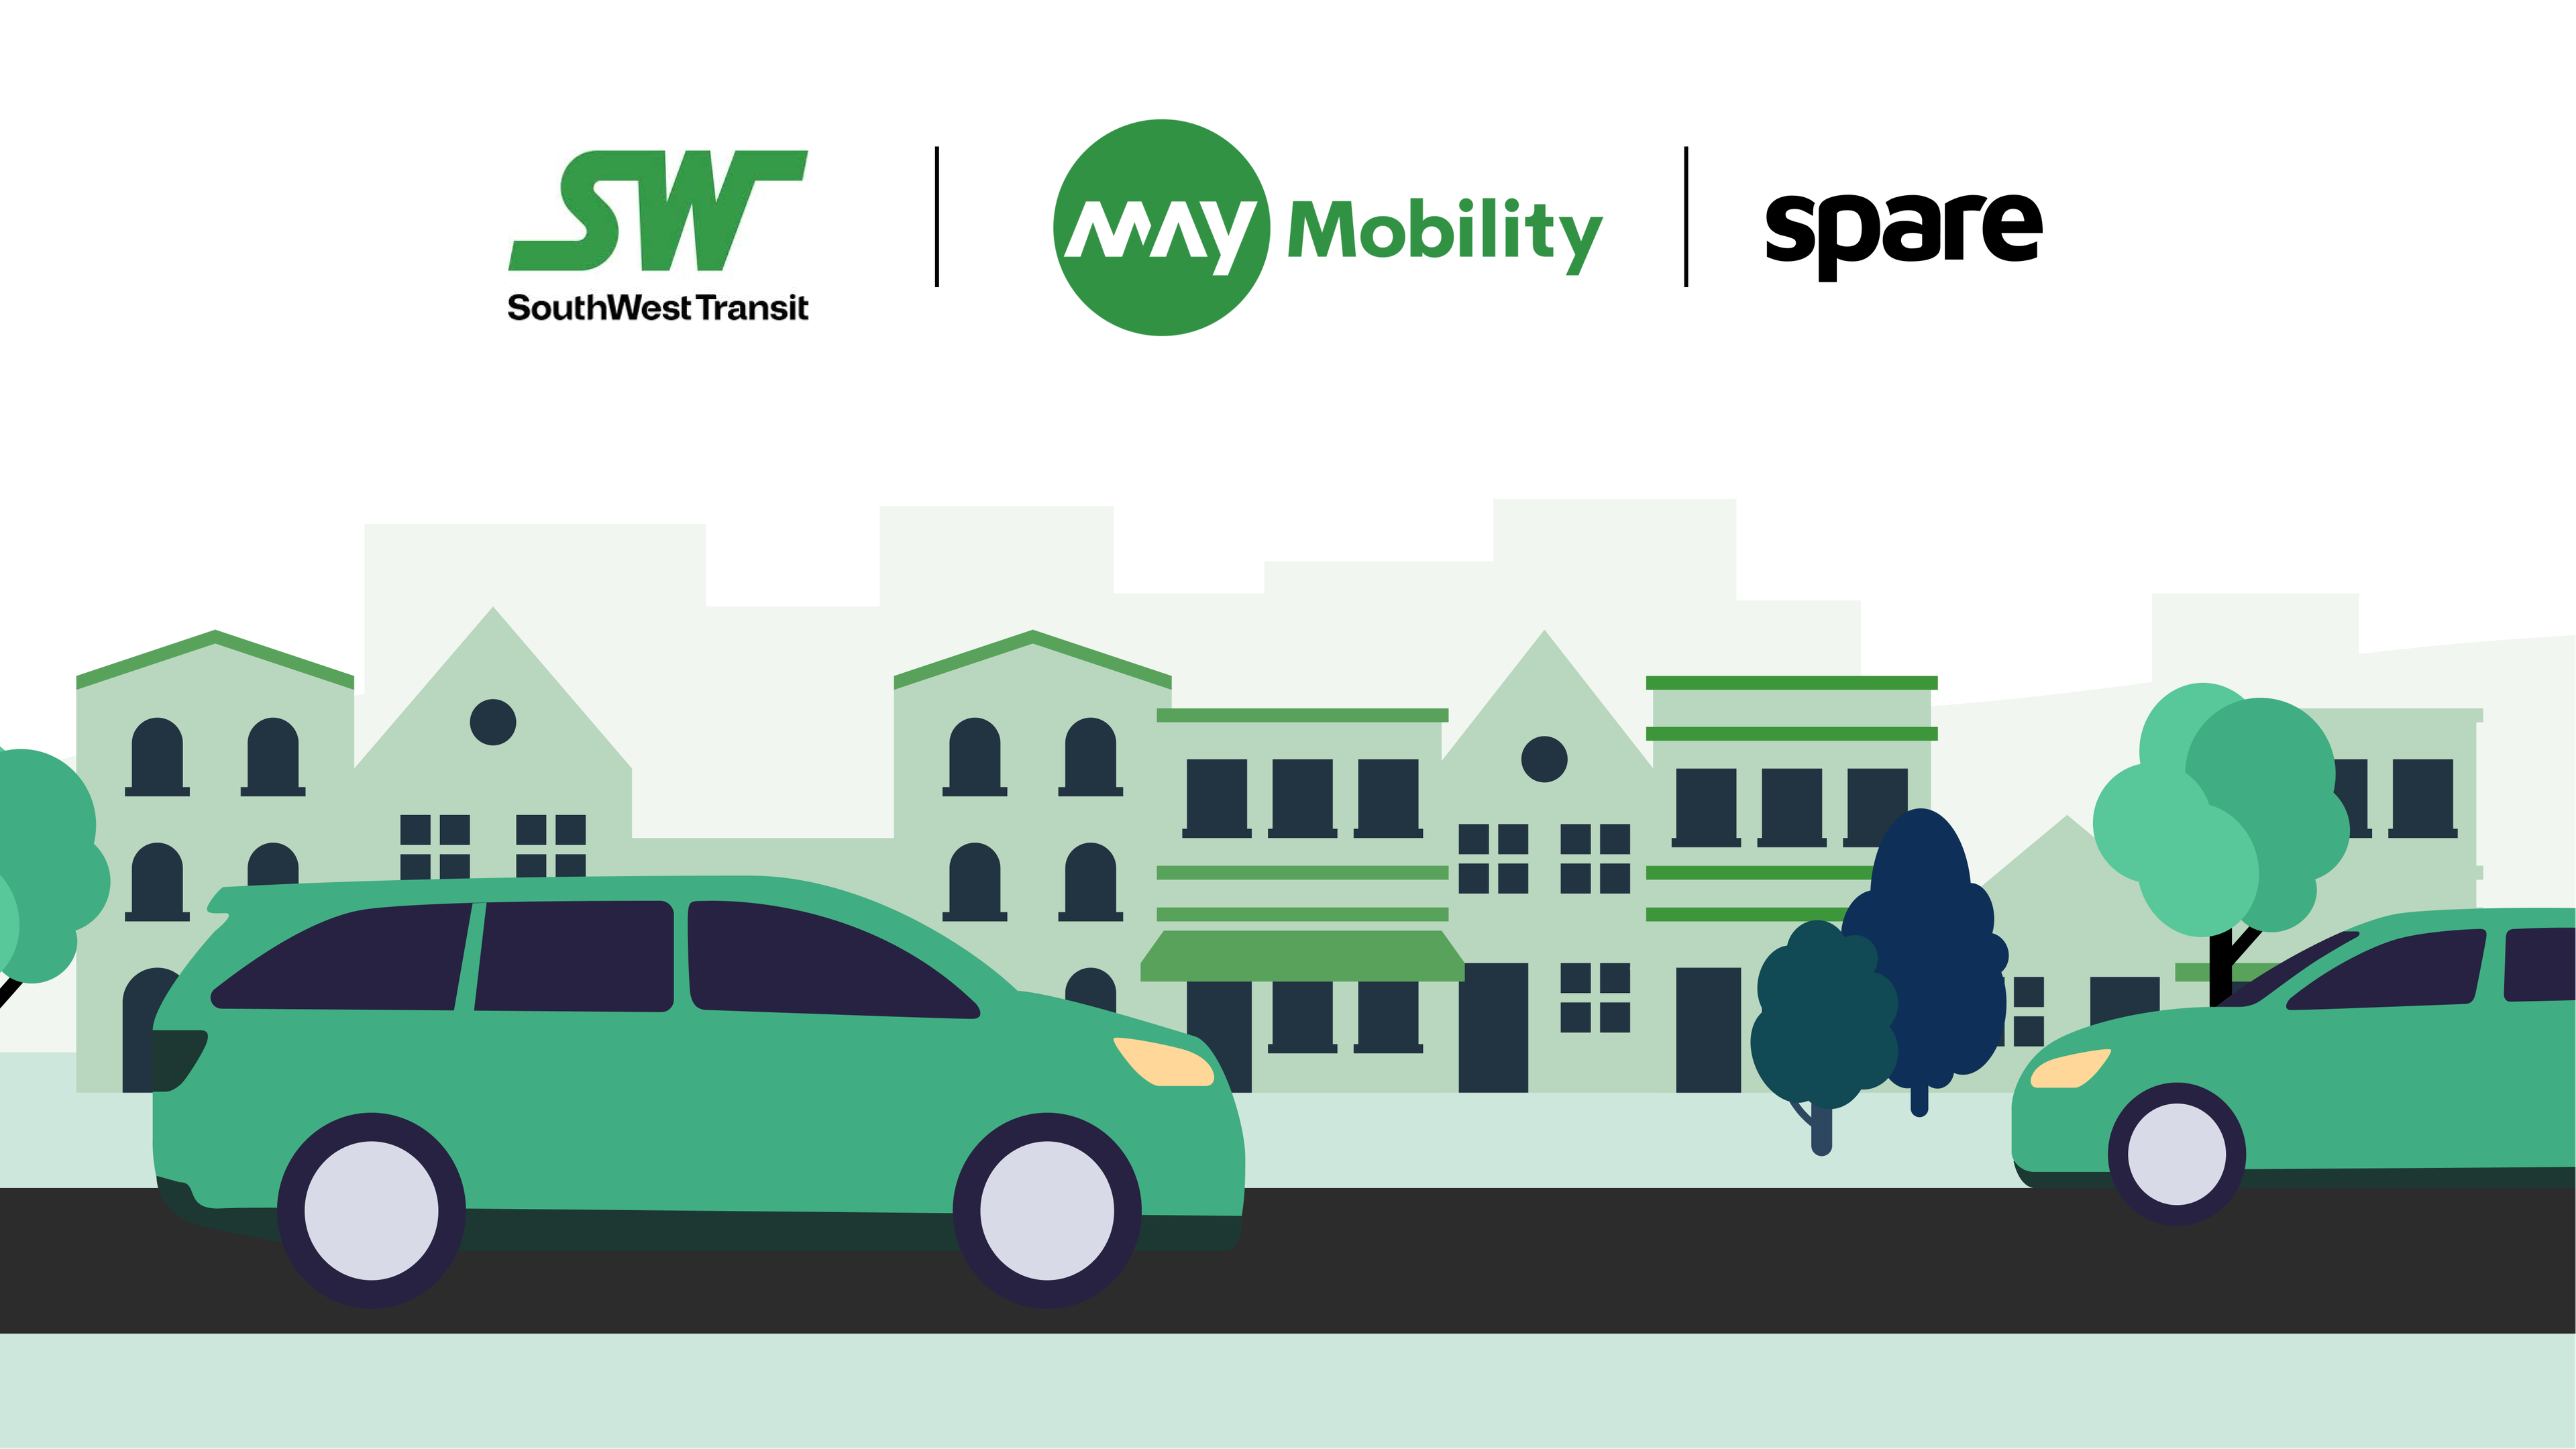 An illustration of two autonomous vehicles in a cityscape. There are logos of SouthWest Transit, May Mobility and Spare at the top of the illustration.  